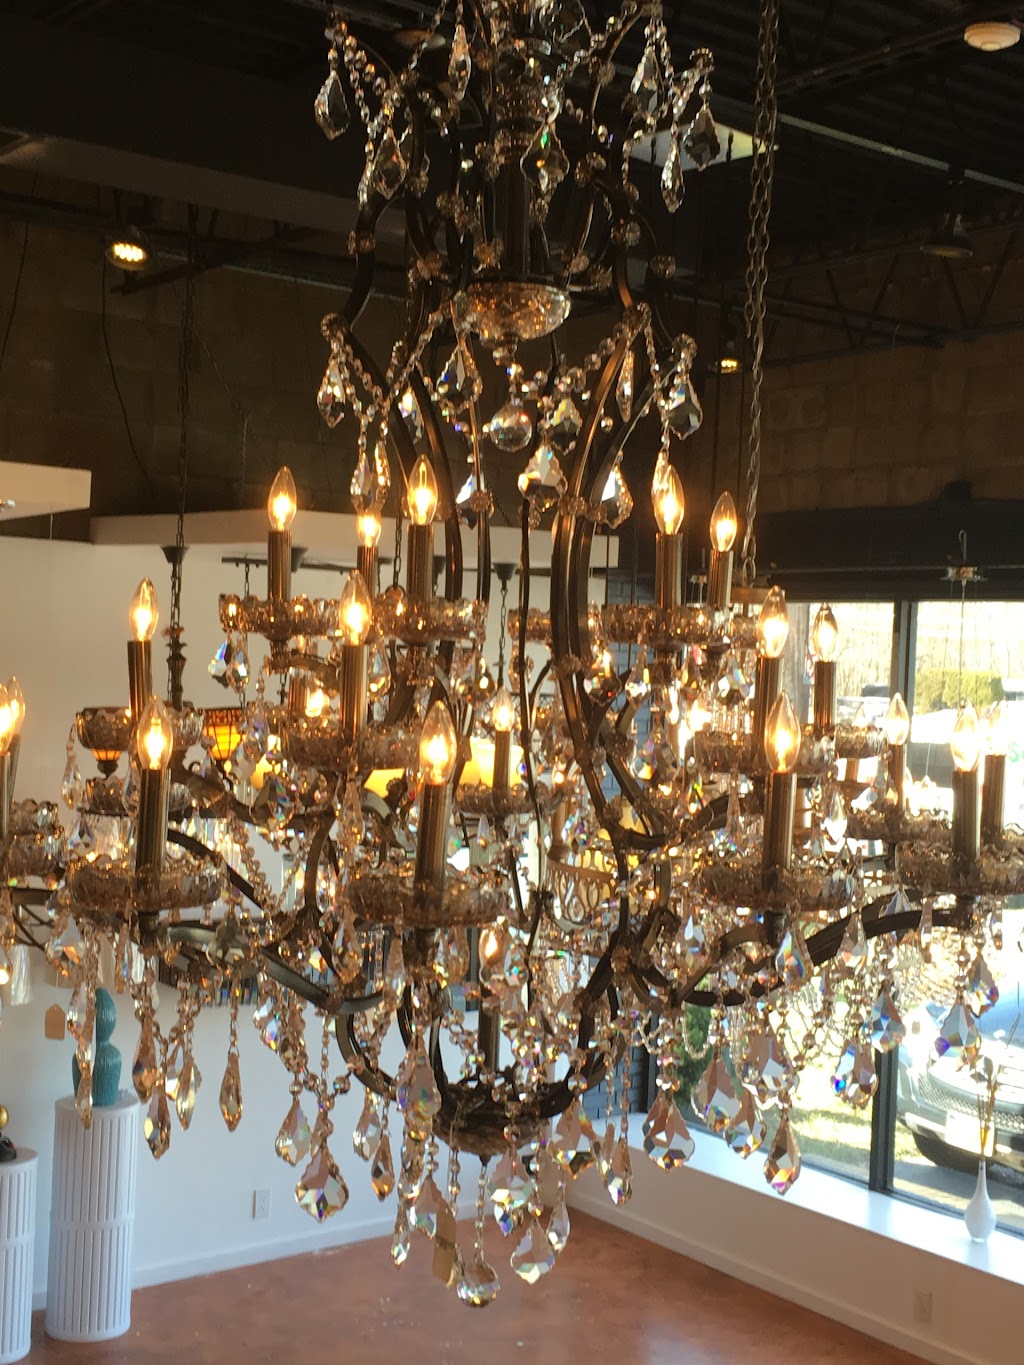 Elegance Lighting | 2436 Middle Country Rd, Centereach, NY 11720 | Phone: (631) 509-0640